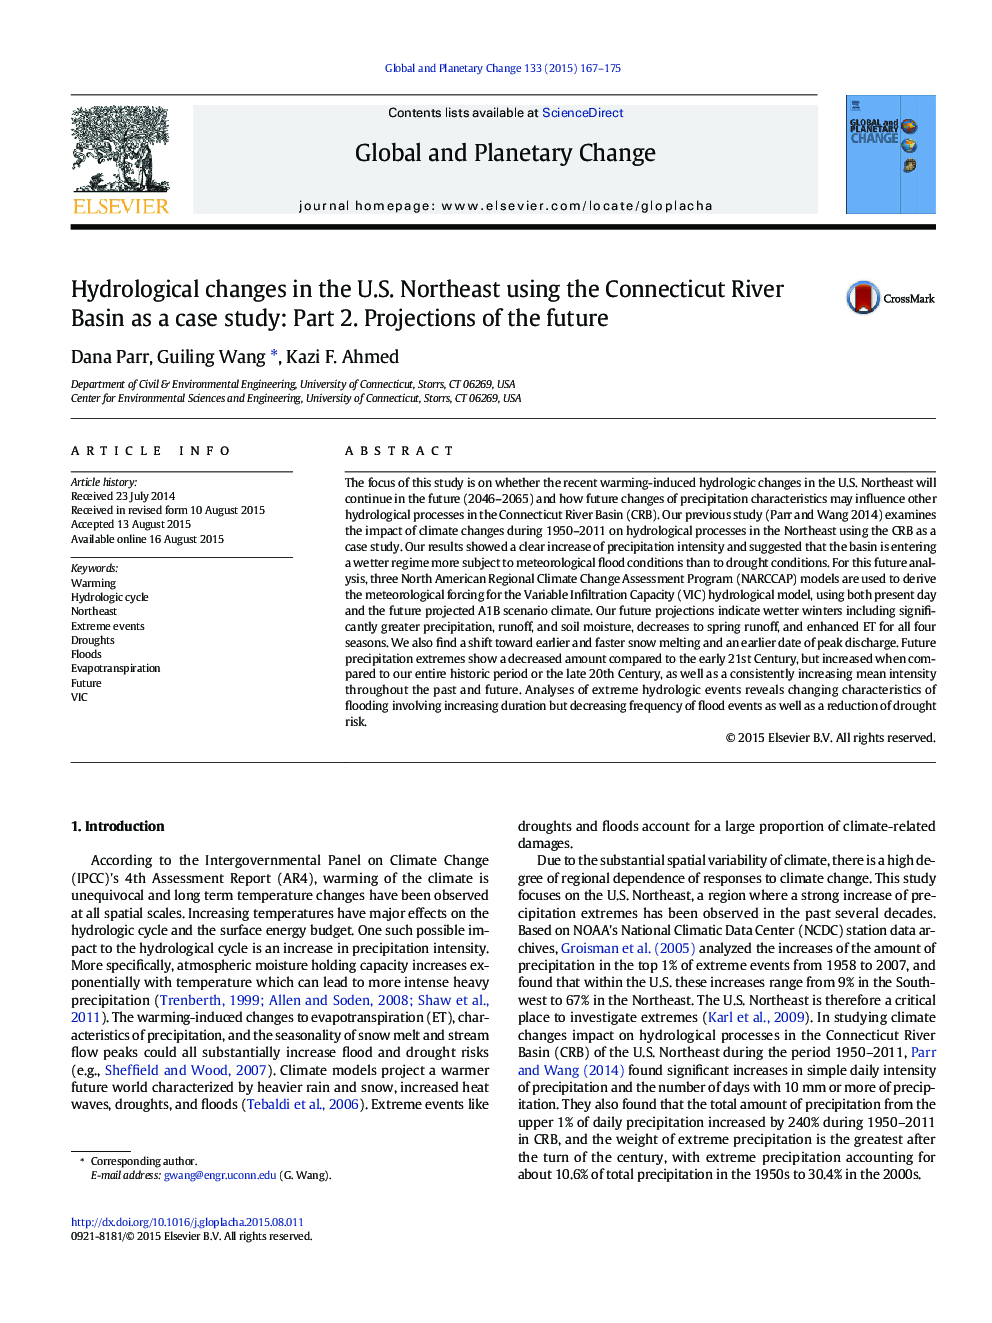 Hydrological changes in the U.S. Northeast using the Connecticut River Basin as a case study: Part 2. Projections of the future